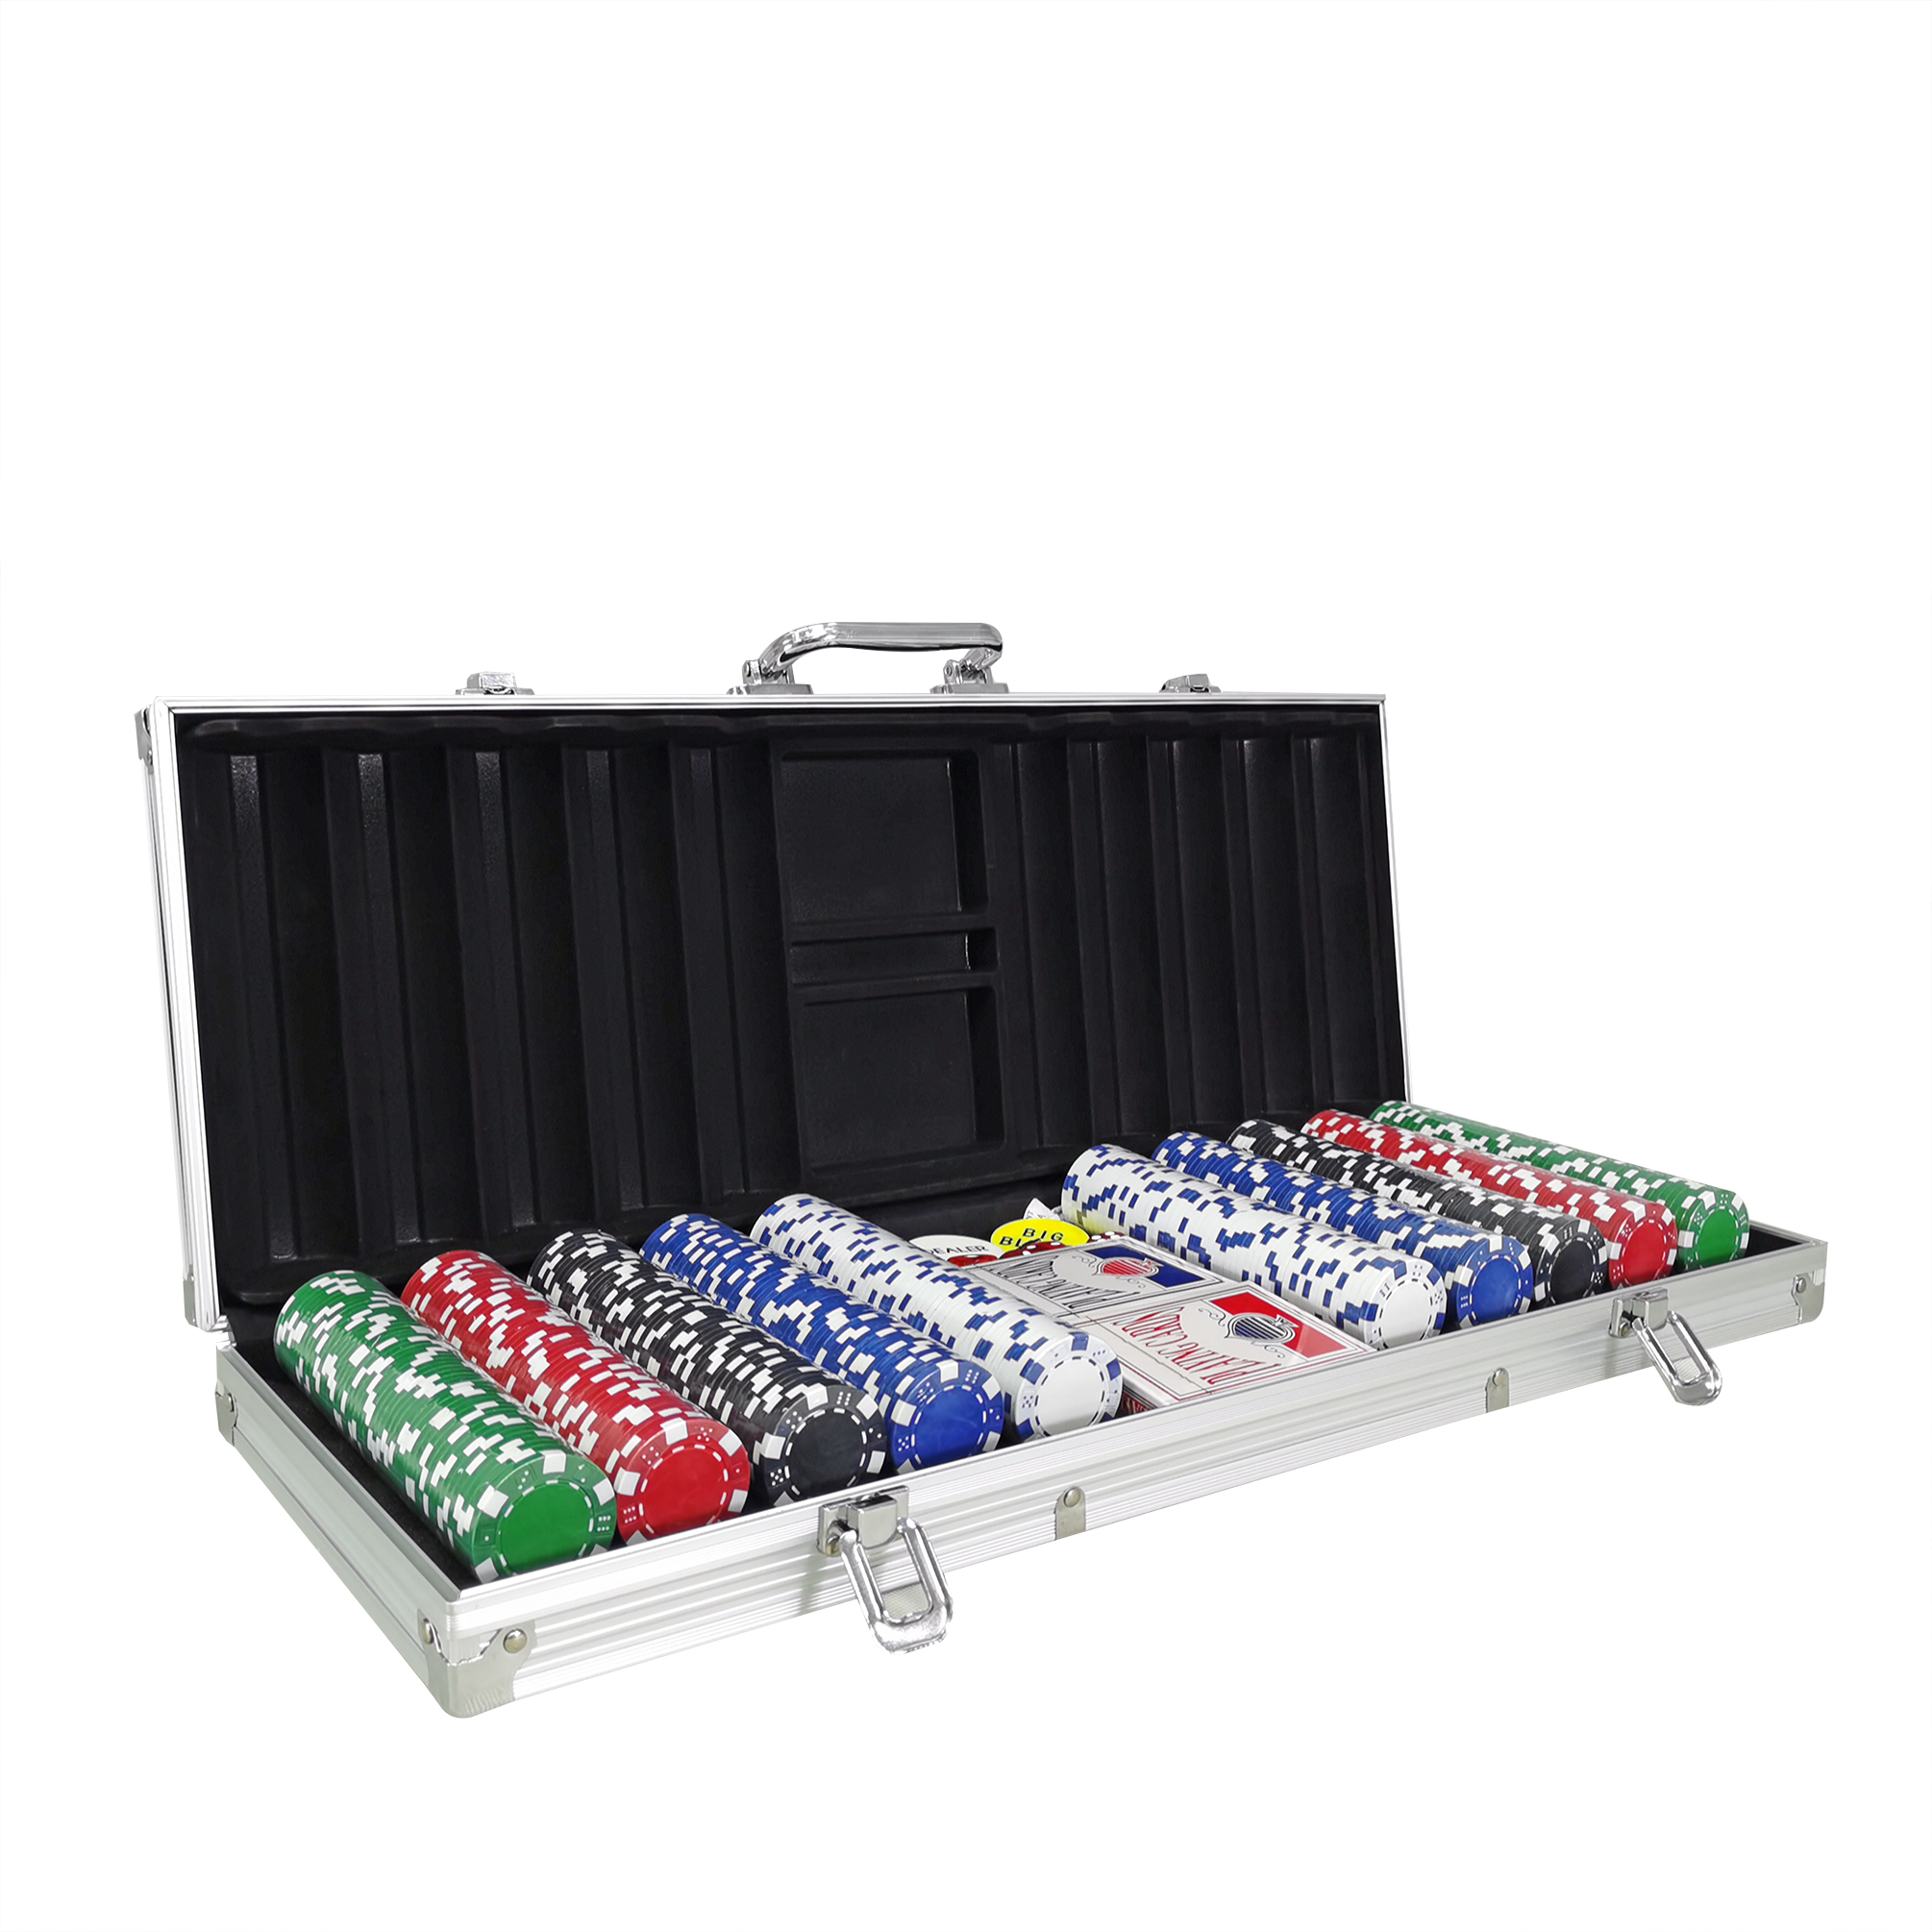 FixtureDisplays 500 pcs Poker Chip Game Set with Aluminum Case 22 X 8.4 X 2.4", 2 Decks of Paper Playing Cards, Dices, Markers for Texas